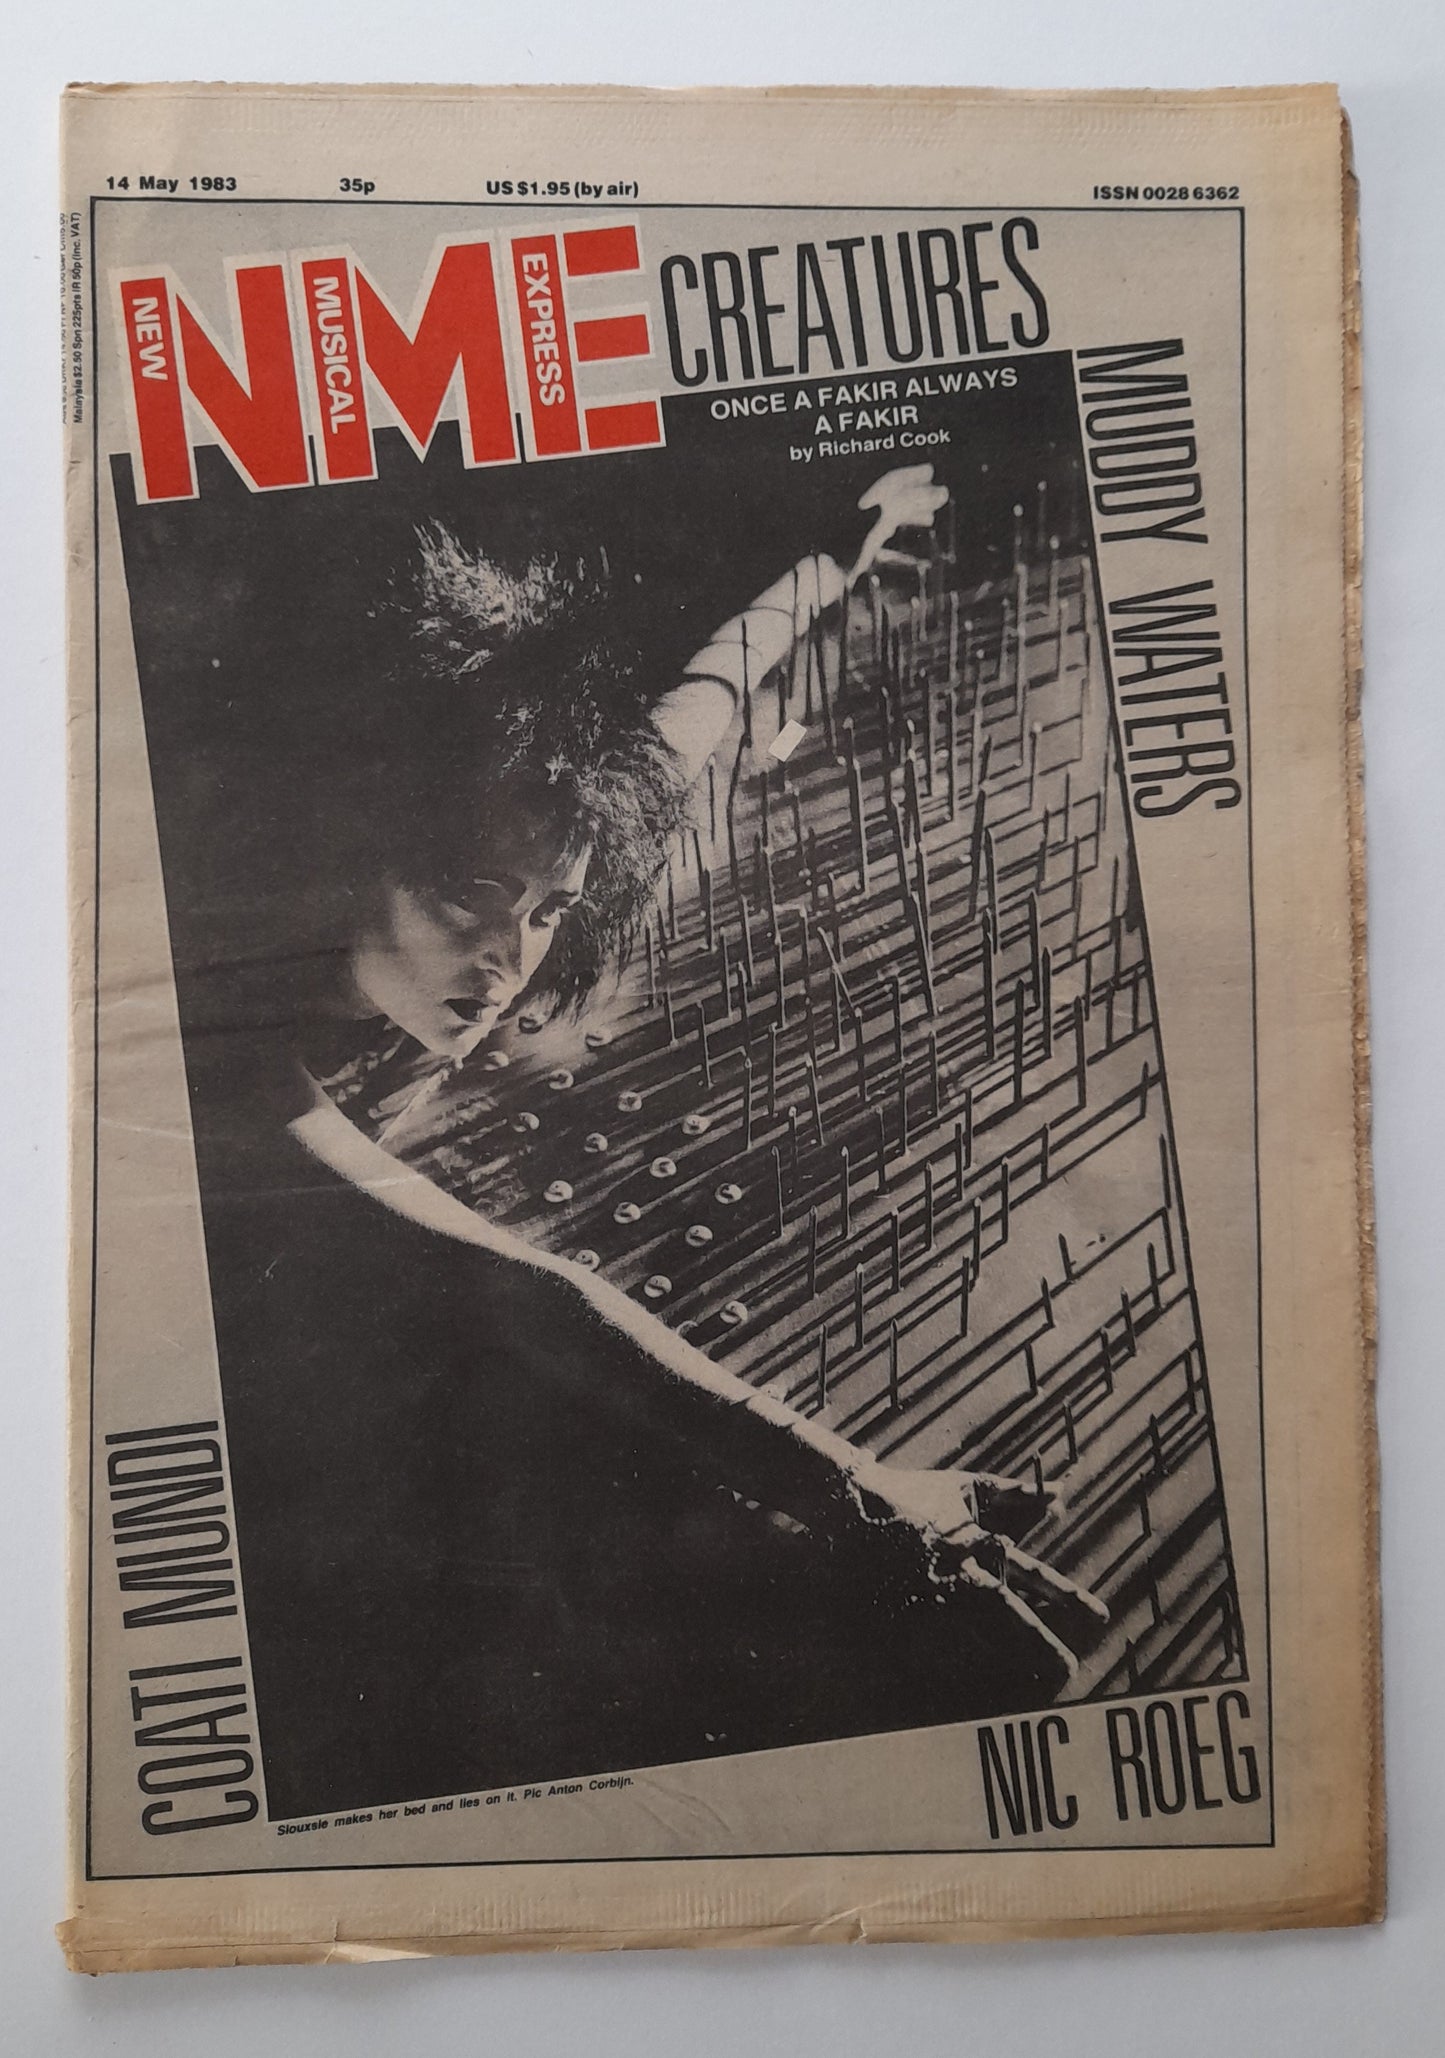 NME Magazine 14 May 1983 - Siouxsie Sioux